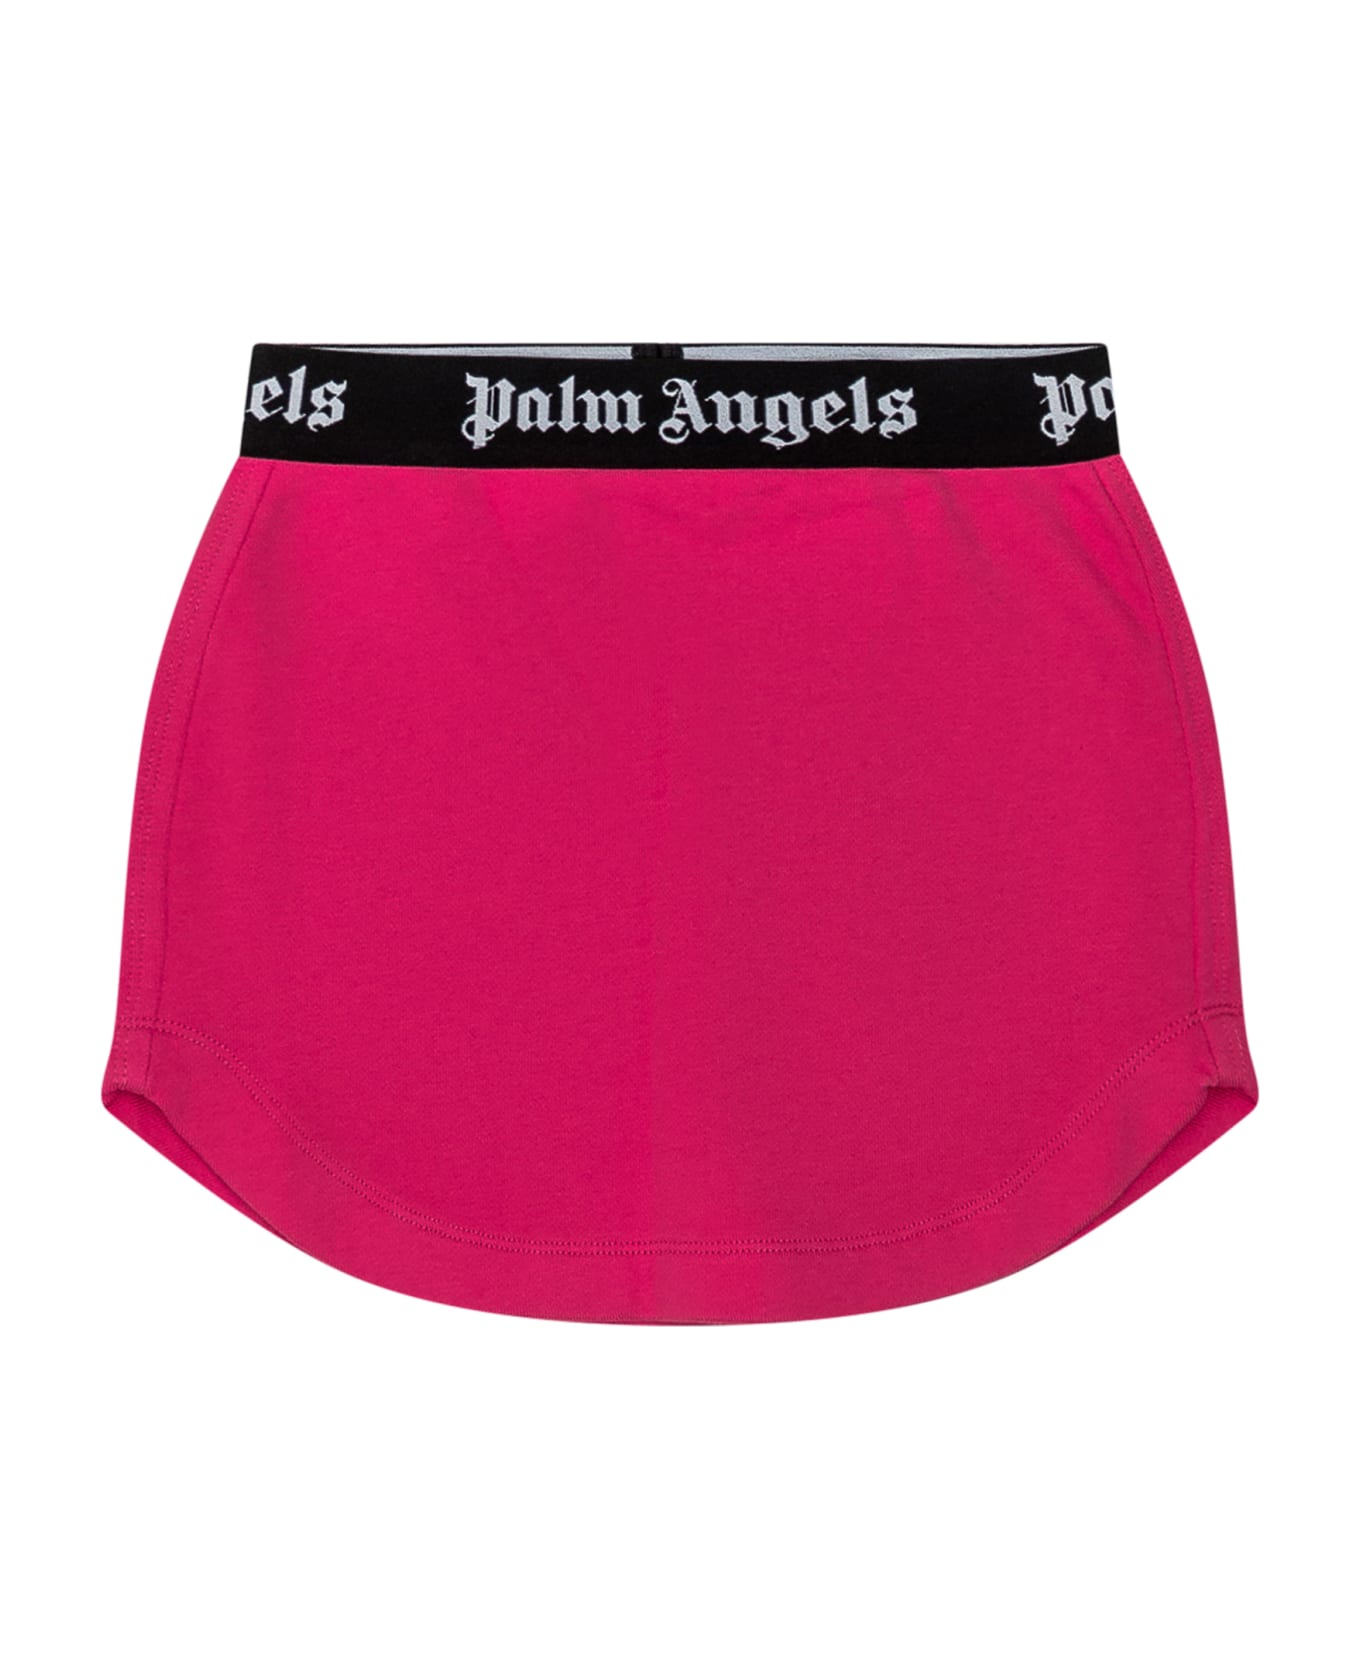 Palm Angels Skirt With Logo - FUCHSIA BL ボトムス